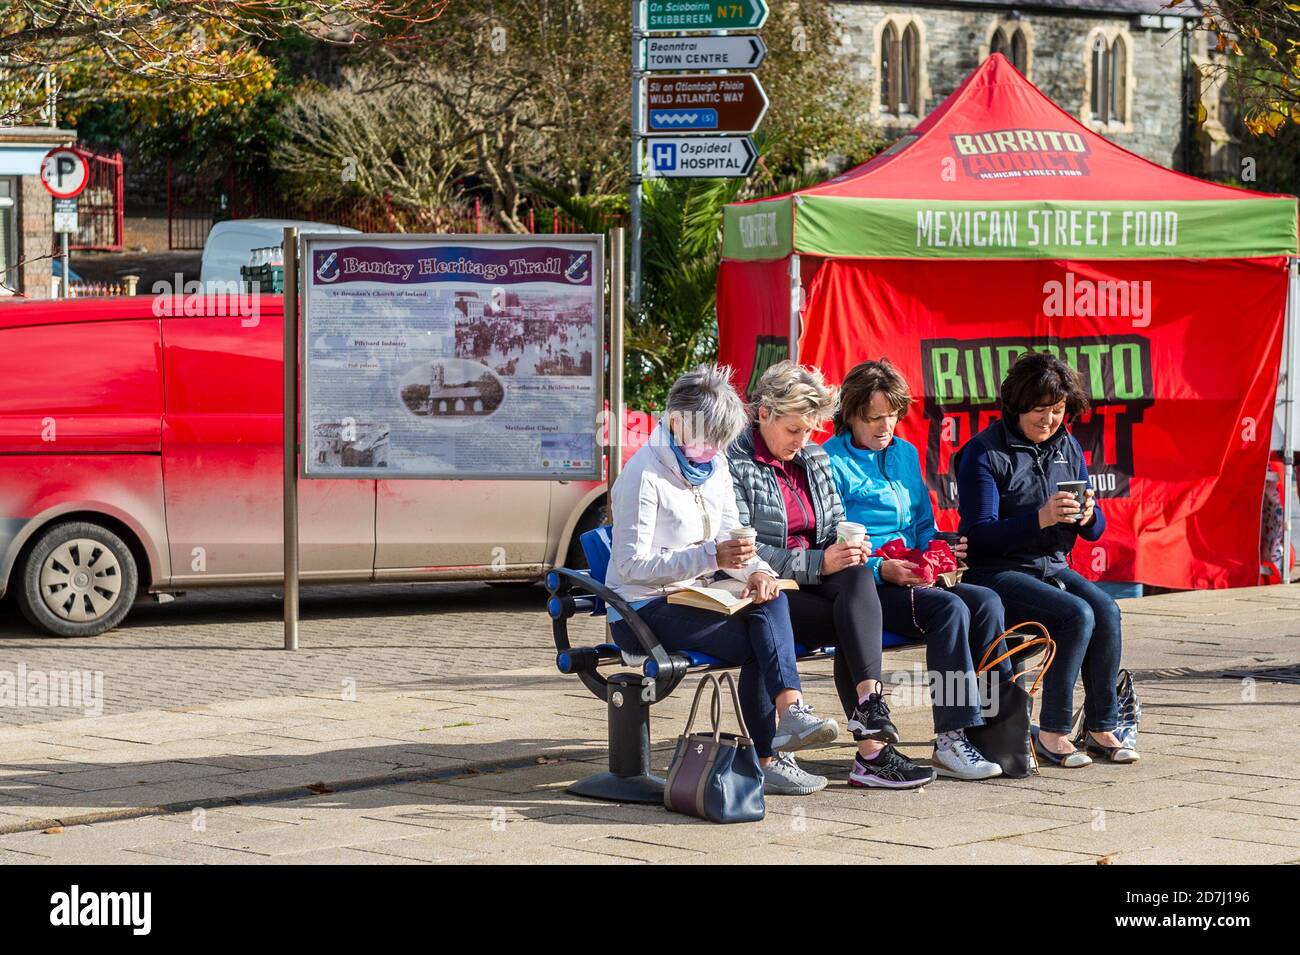 Bantry, West Cork, Ireland. 23rd Oct, 2020. Bantry Friday Market is operating today and is quieter than usual. Many people took the opportunity to meet their friends in the sunshine. Credit: AG News/Alamy Live News Stock Photo